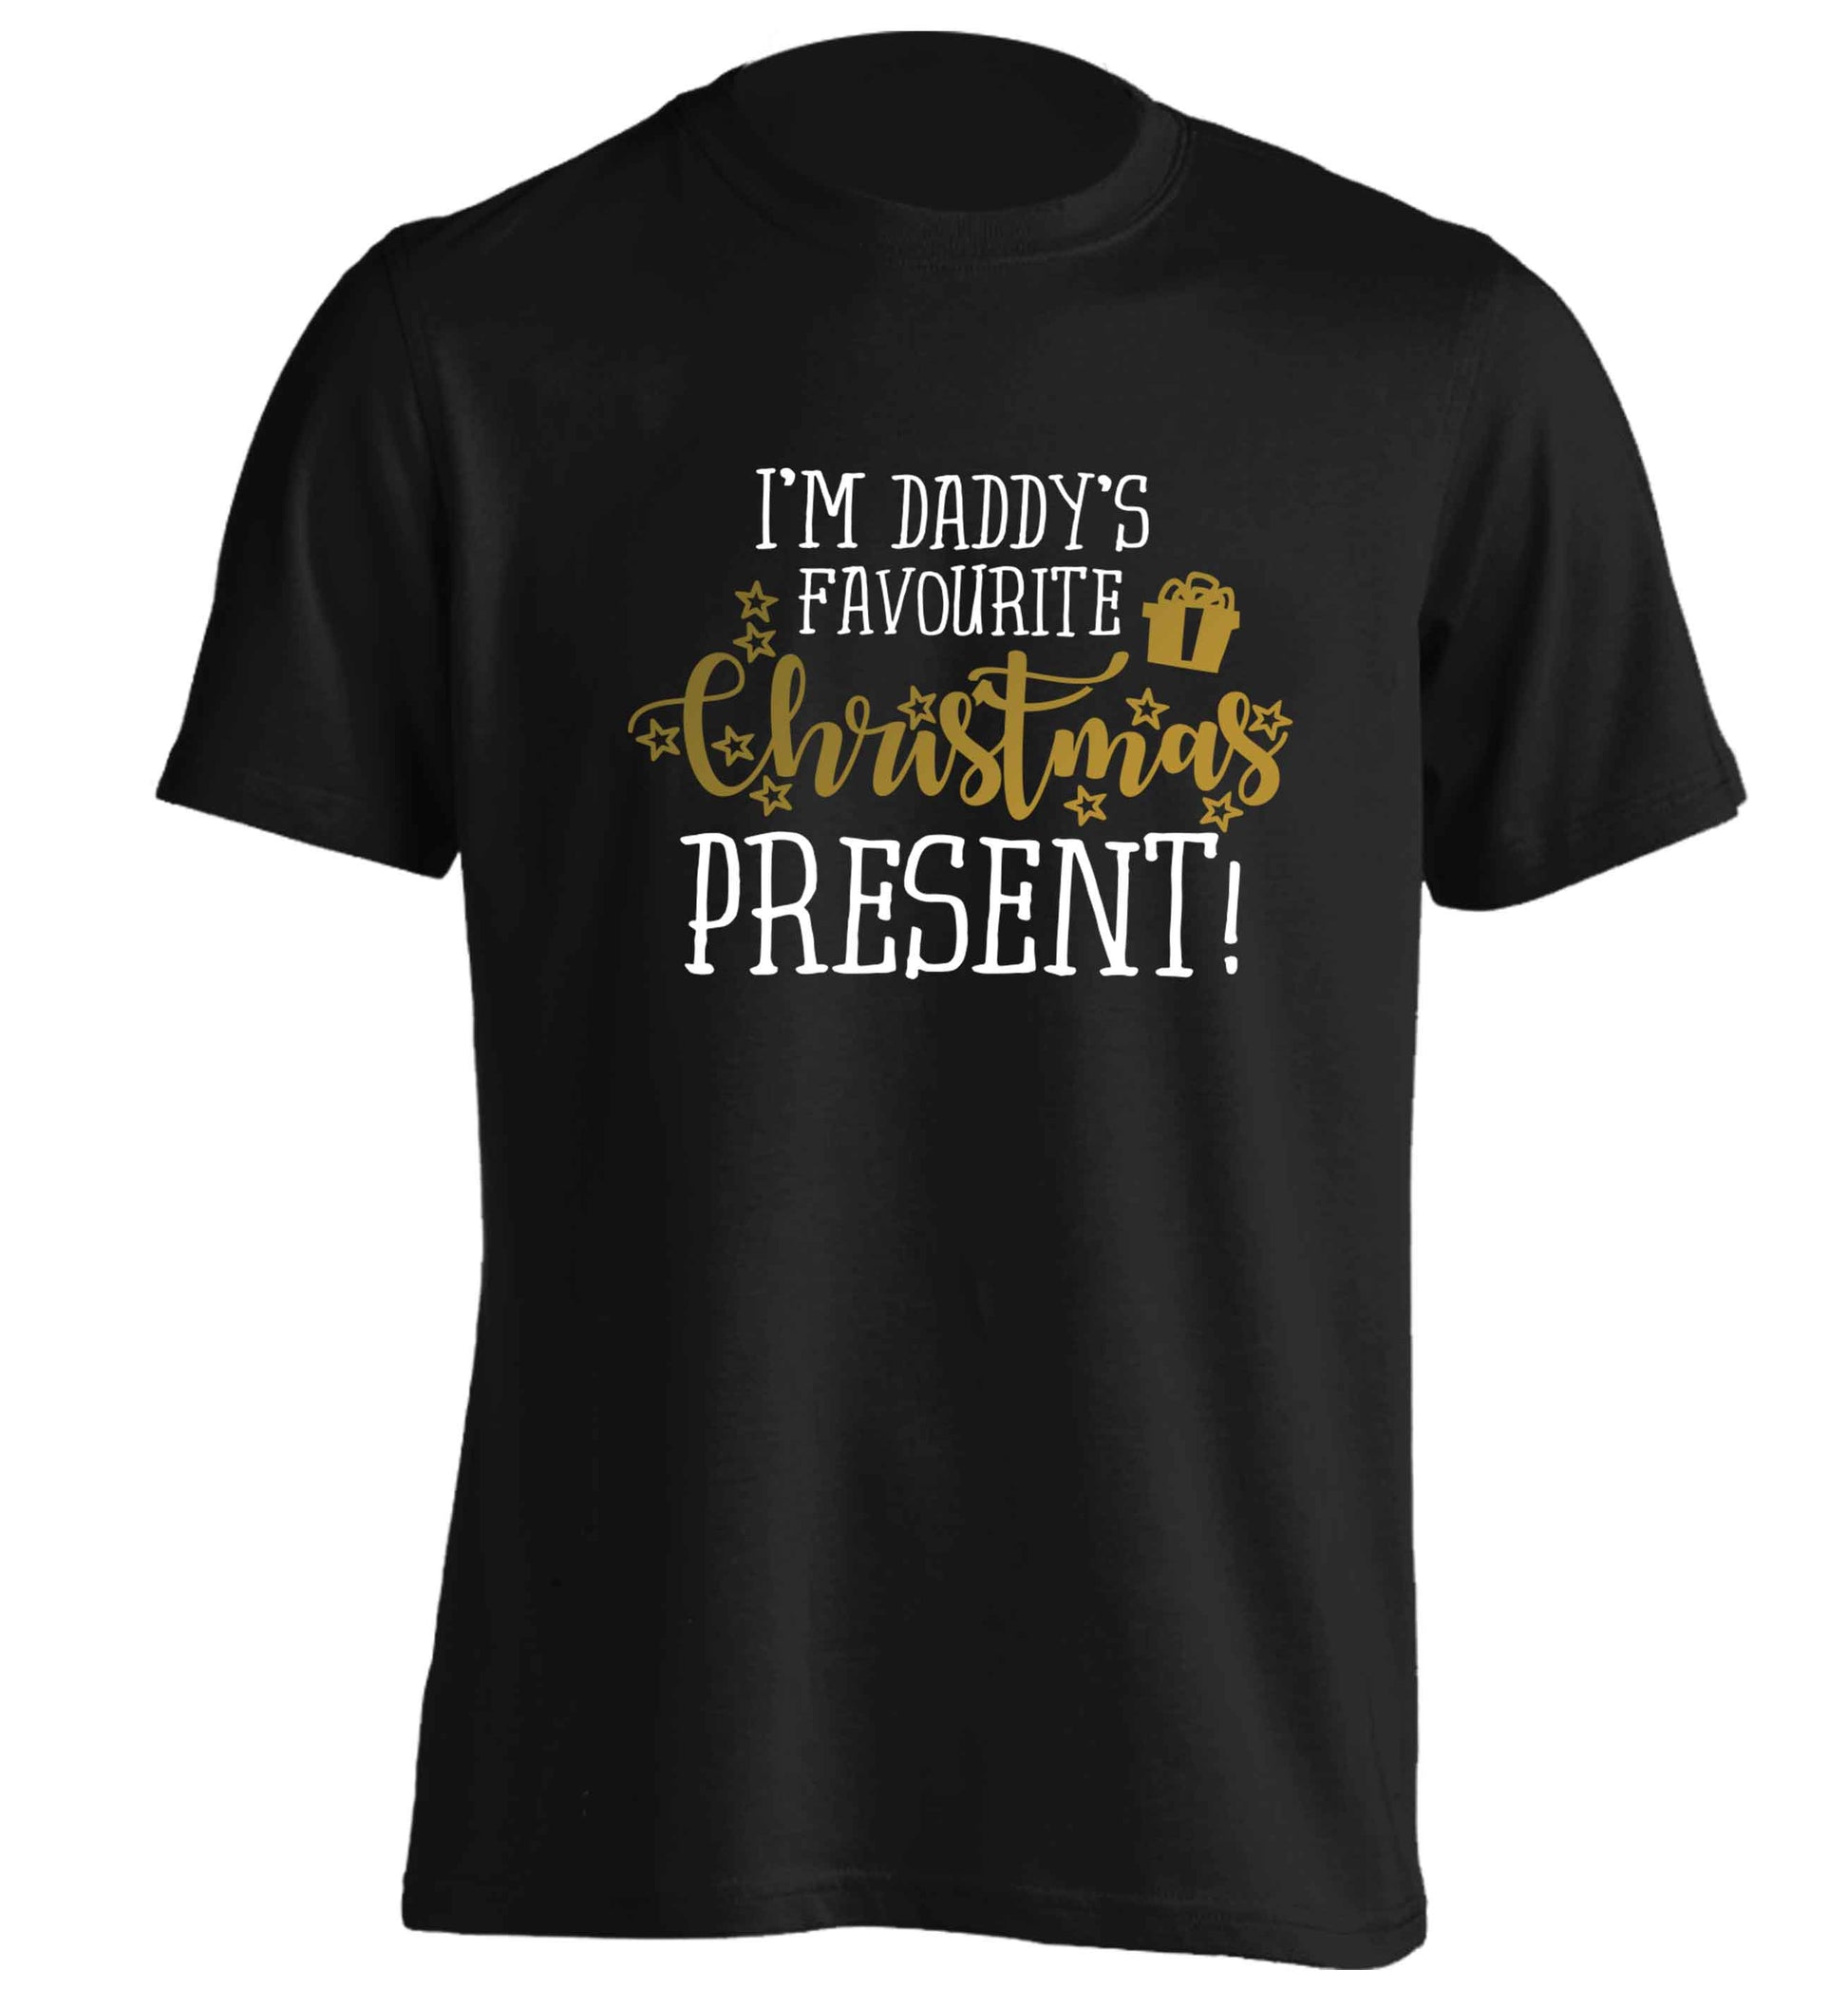 Daddy's favourite Christmas present adults unisex black Tshirt 2XL